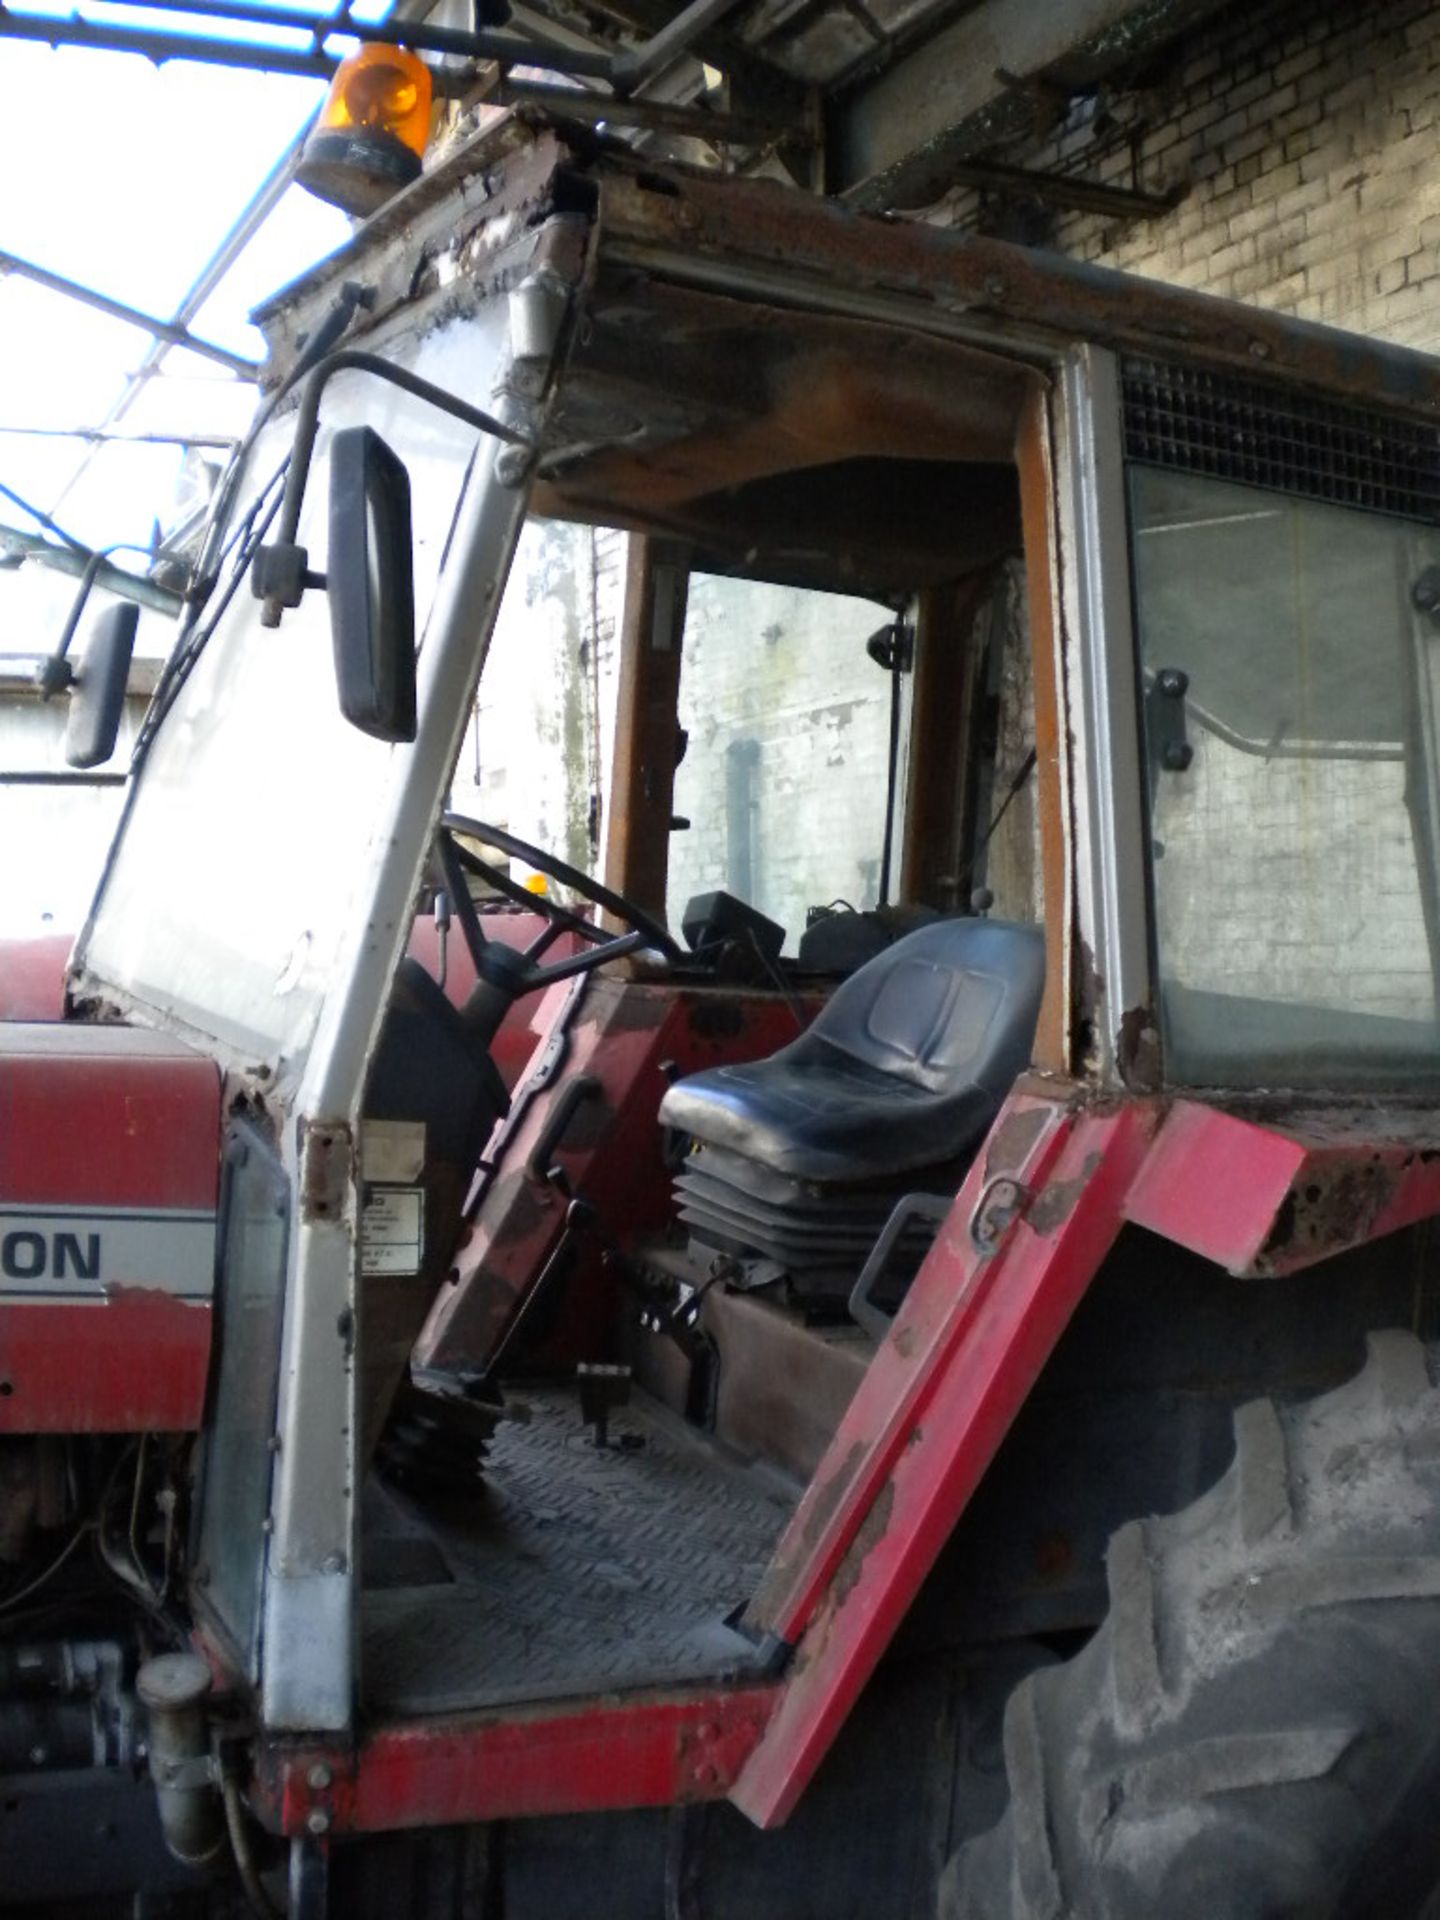 Massey Ferguson 698T 2WD AGRICULTURAL TRACTOR, serial no. B205033, (not road registered) with - Image 6 of 6